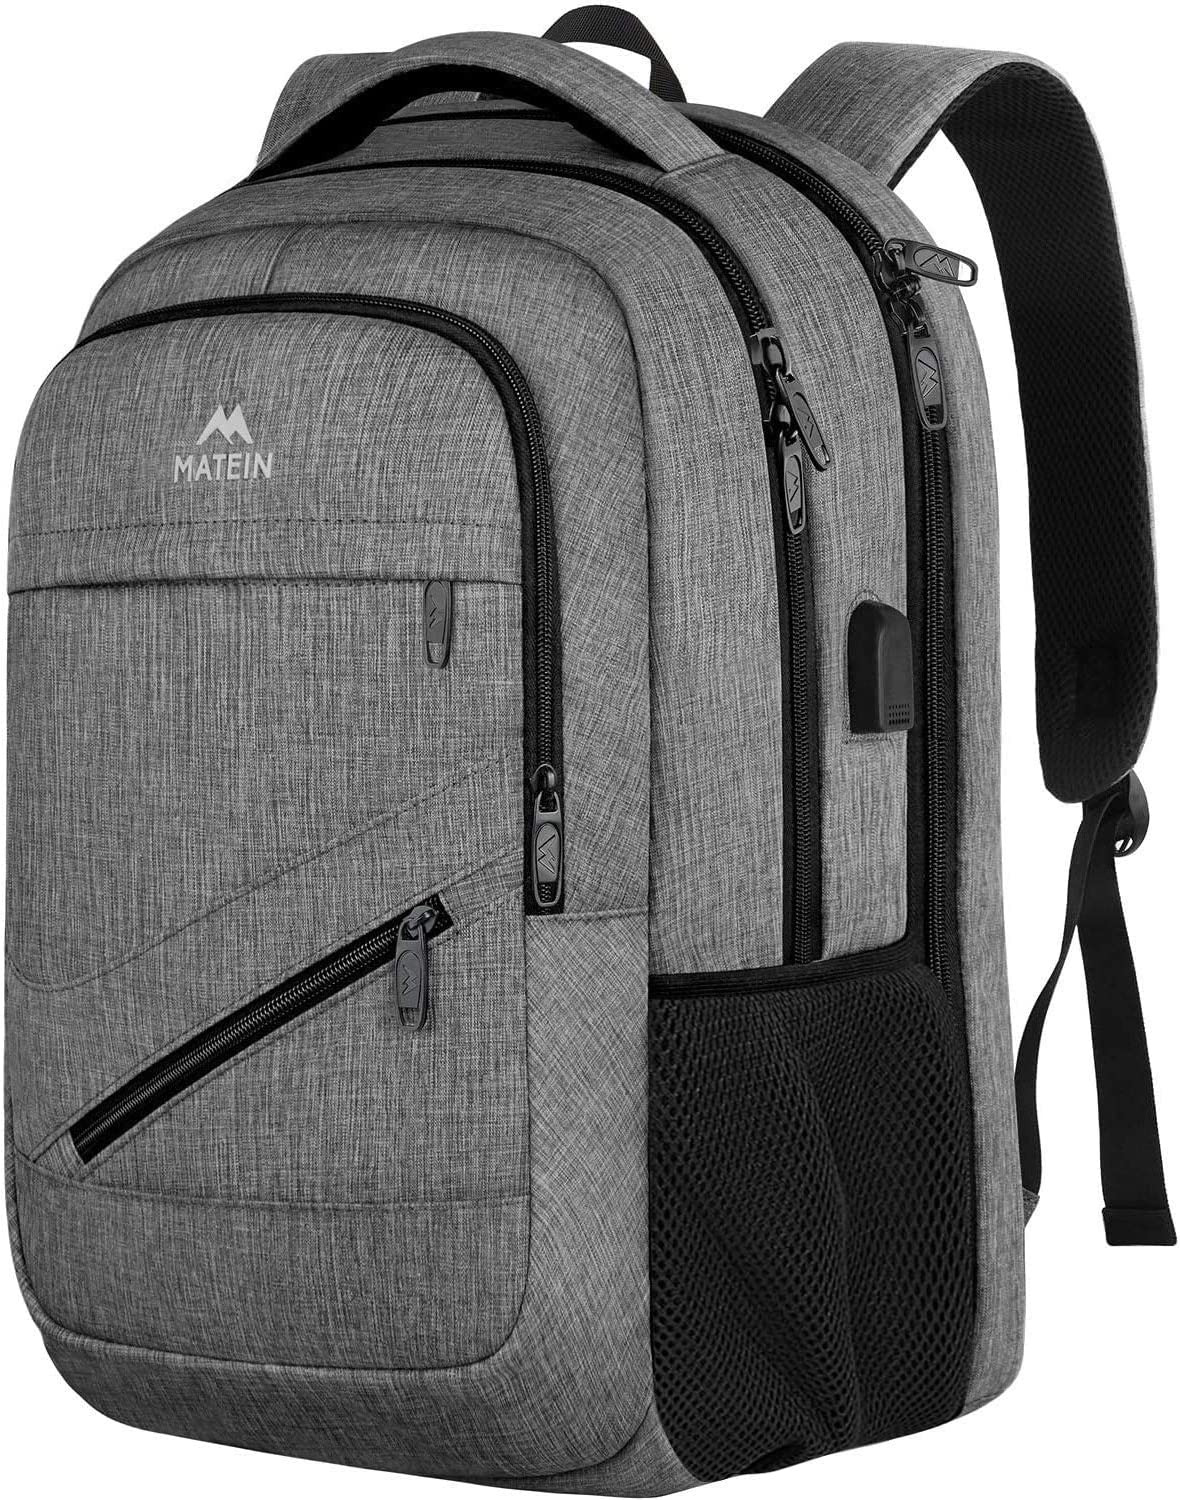 MATEIN Travel Laptop Backpack 17 Inch Business Flight Approved Carry on Backpack